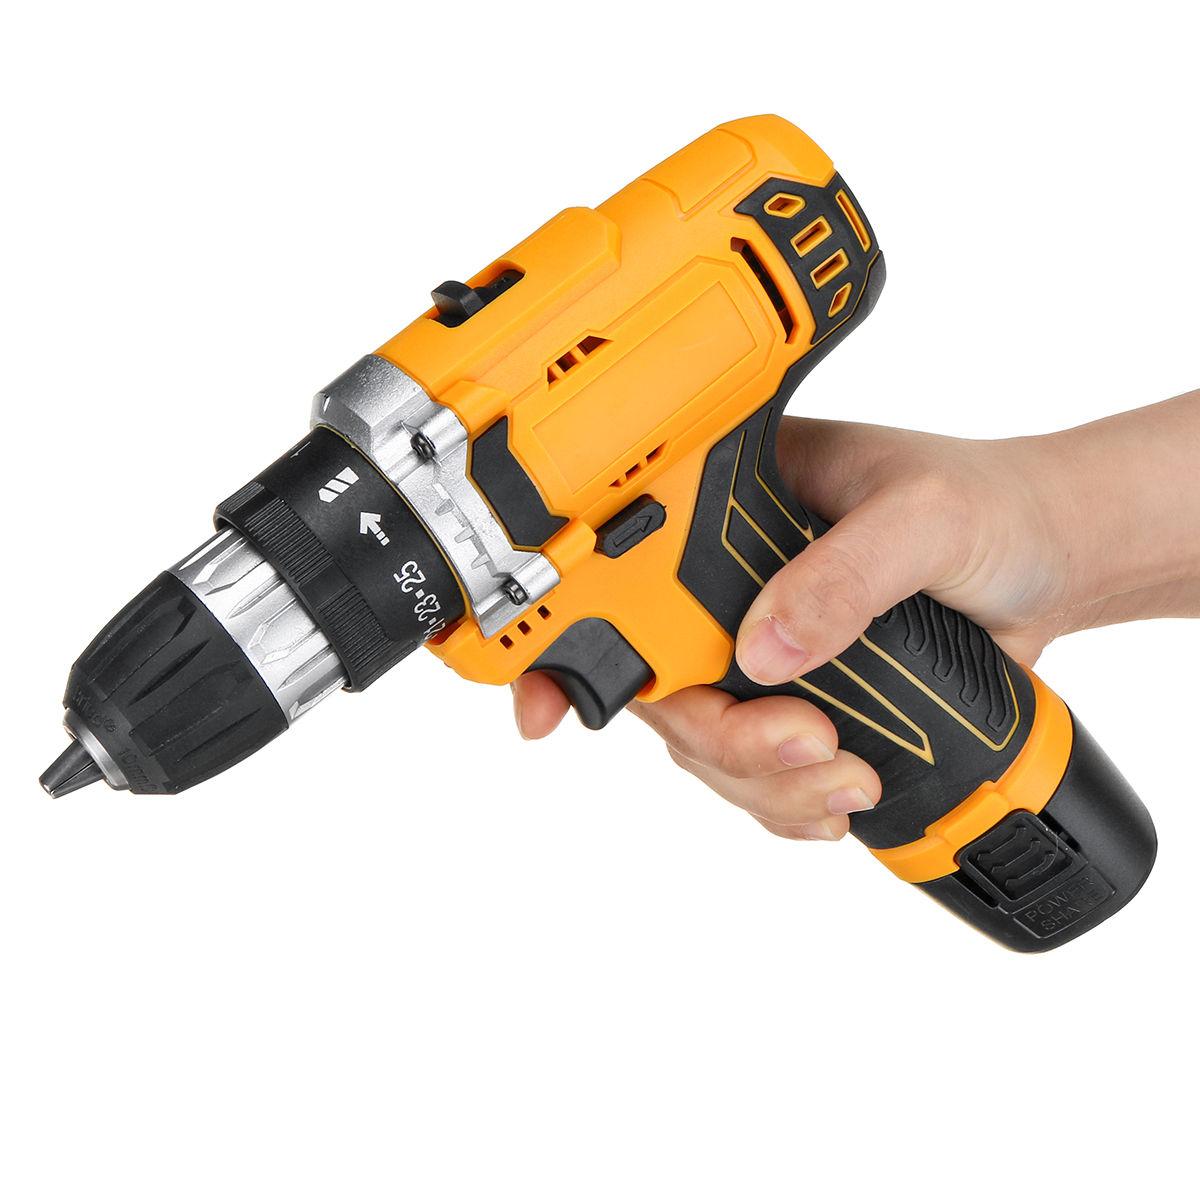 121821V-251-Torque-2-Speed-Cordless-Electric-Drill-Screwdriver-W-LED-Light-1733758-8